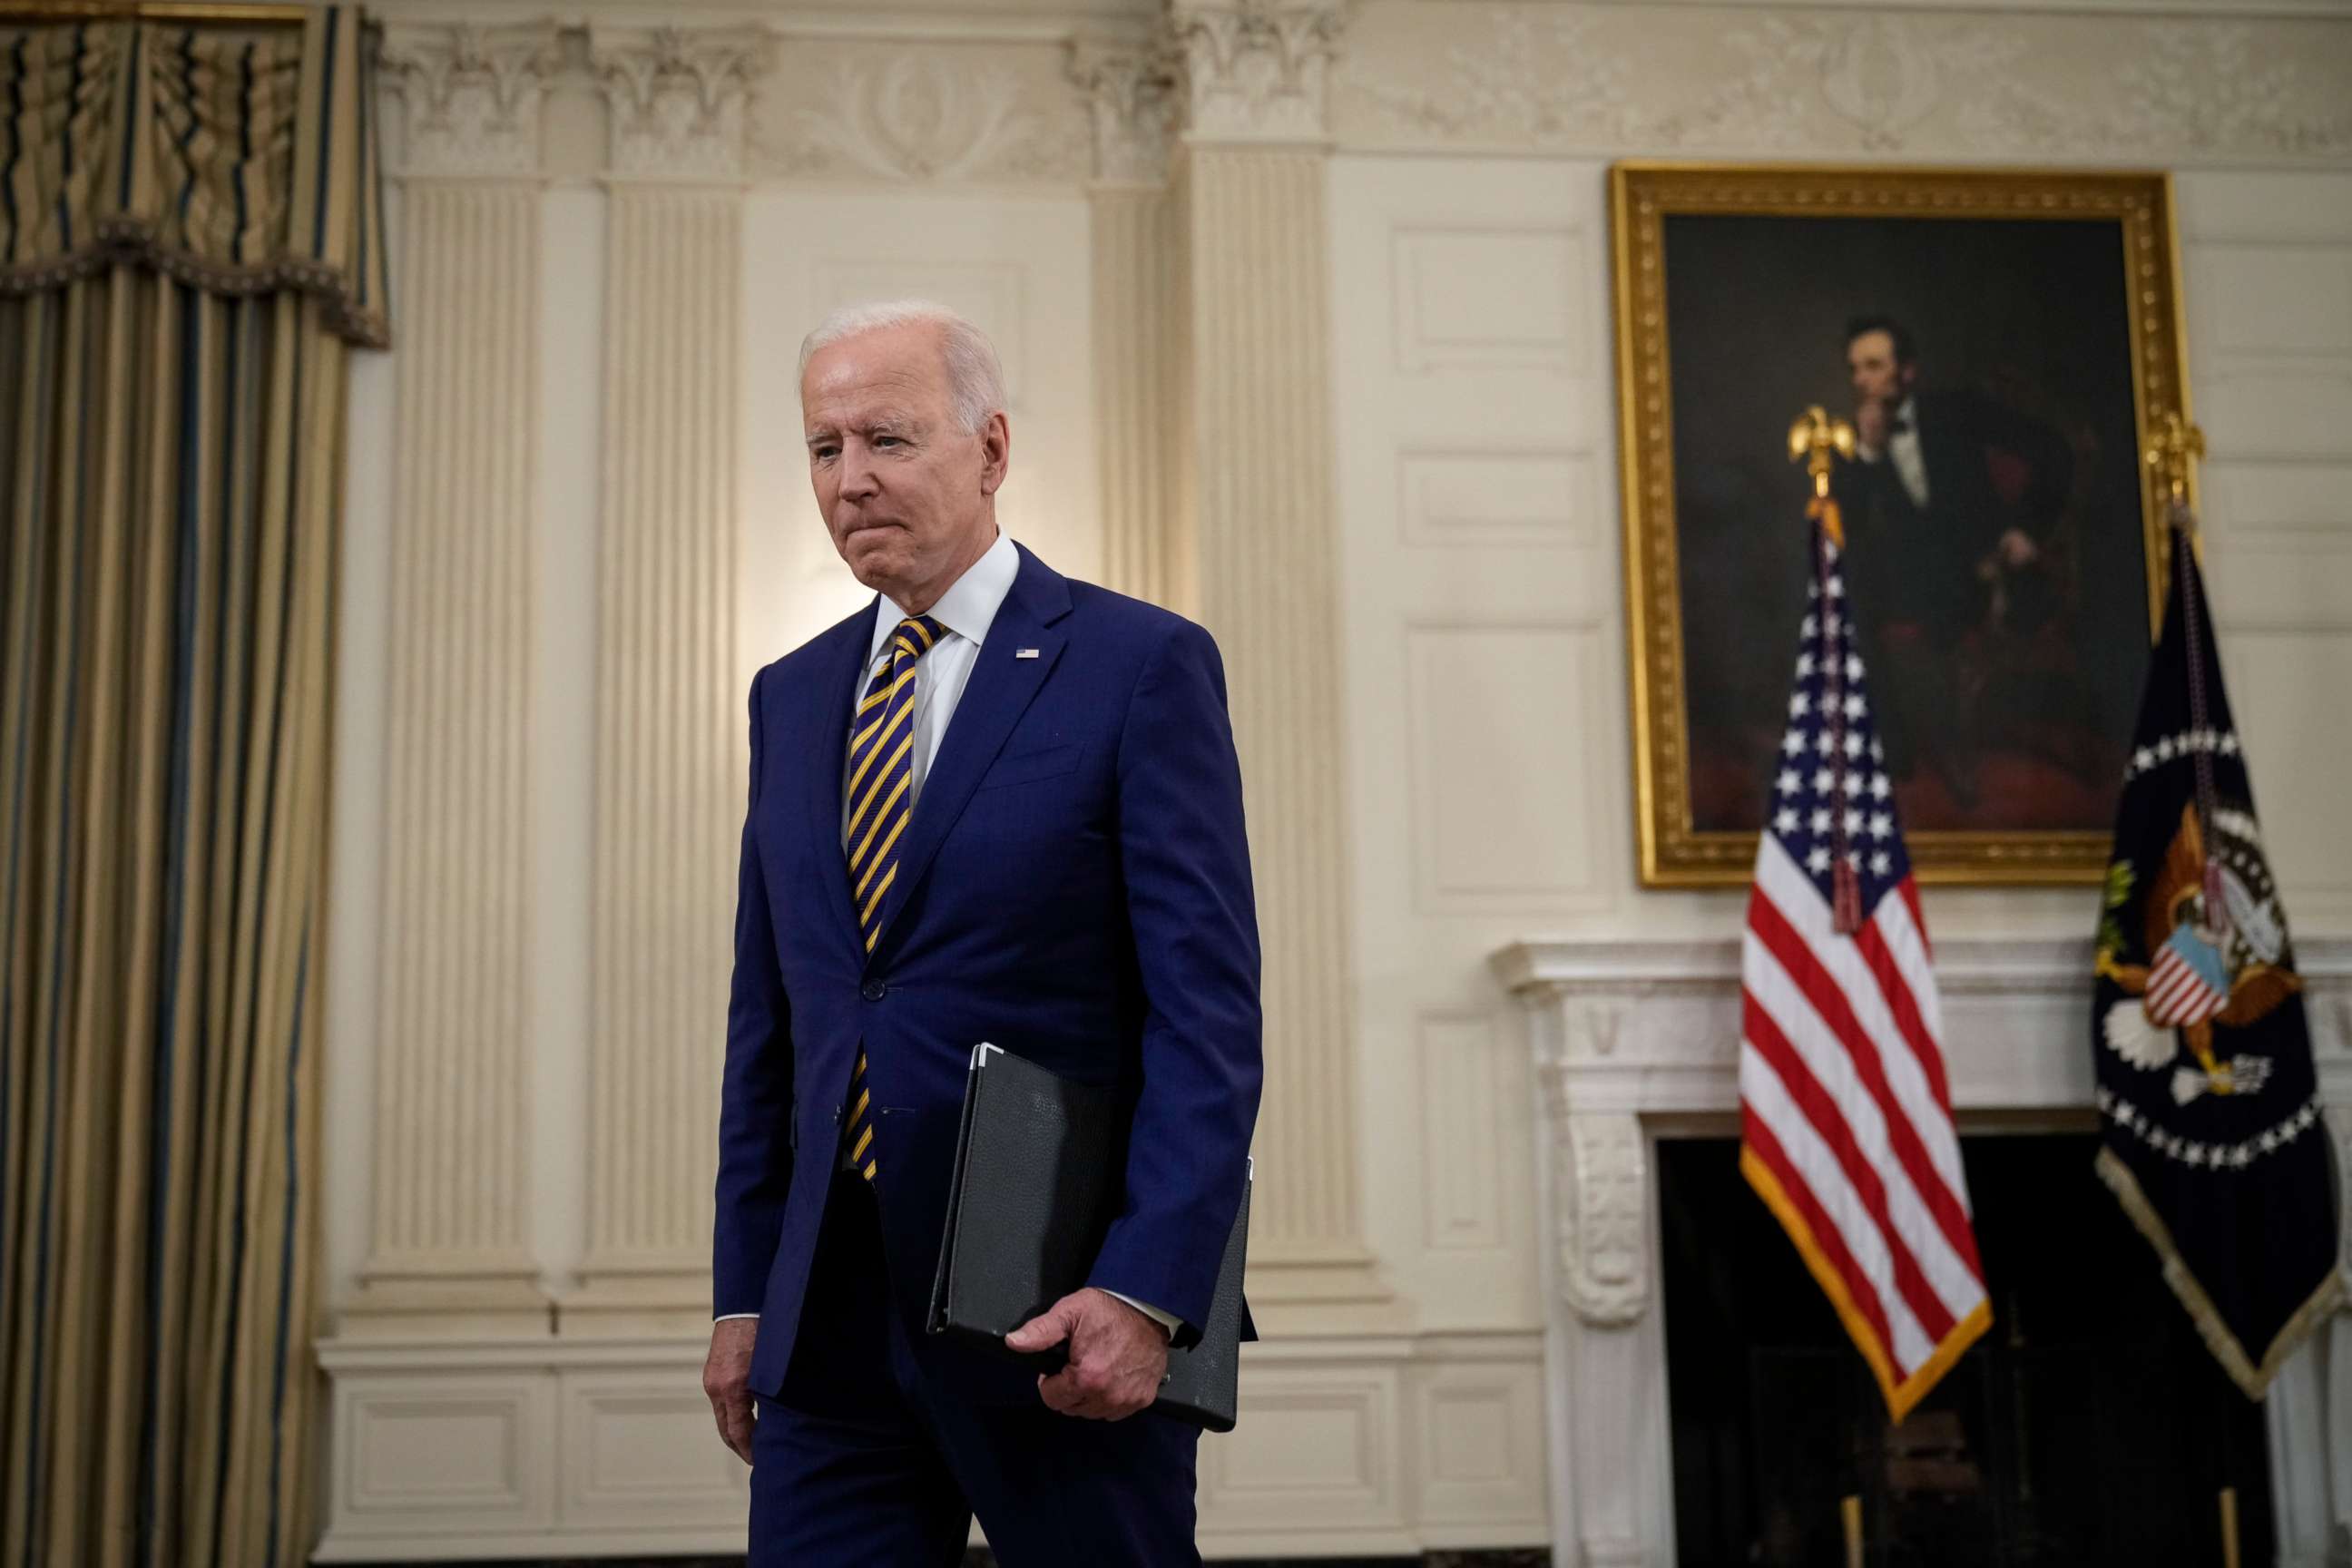 PHOTO: President Joe Biden departs after speaking about the nation's COVID-19 response and the vaccination program in the State Dining Room of the White House on June 18, 2021, in Washington.